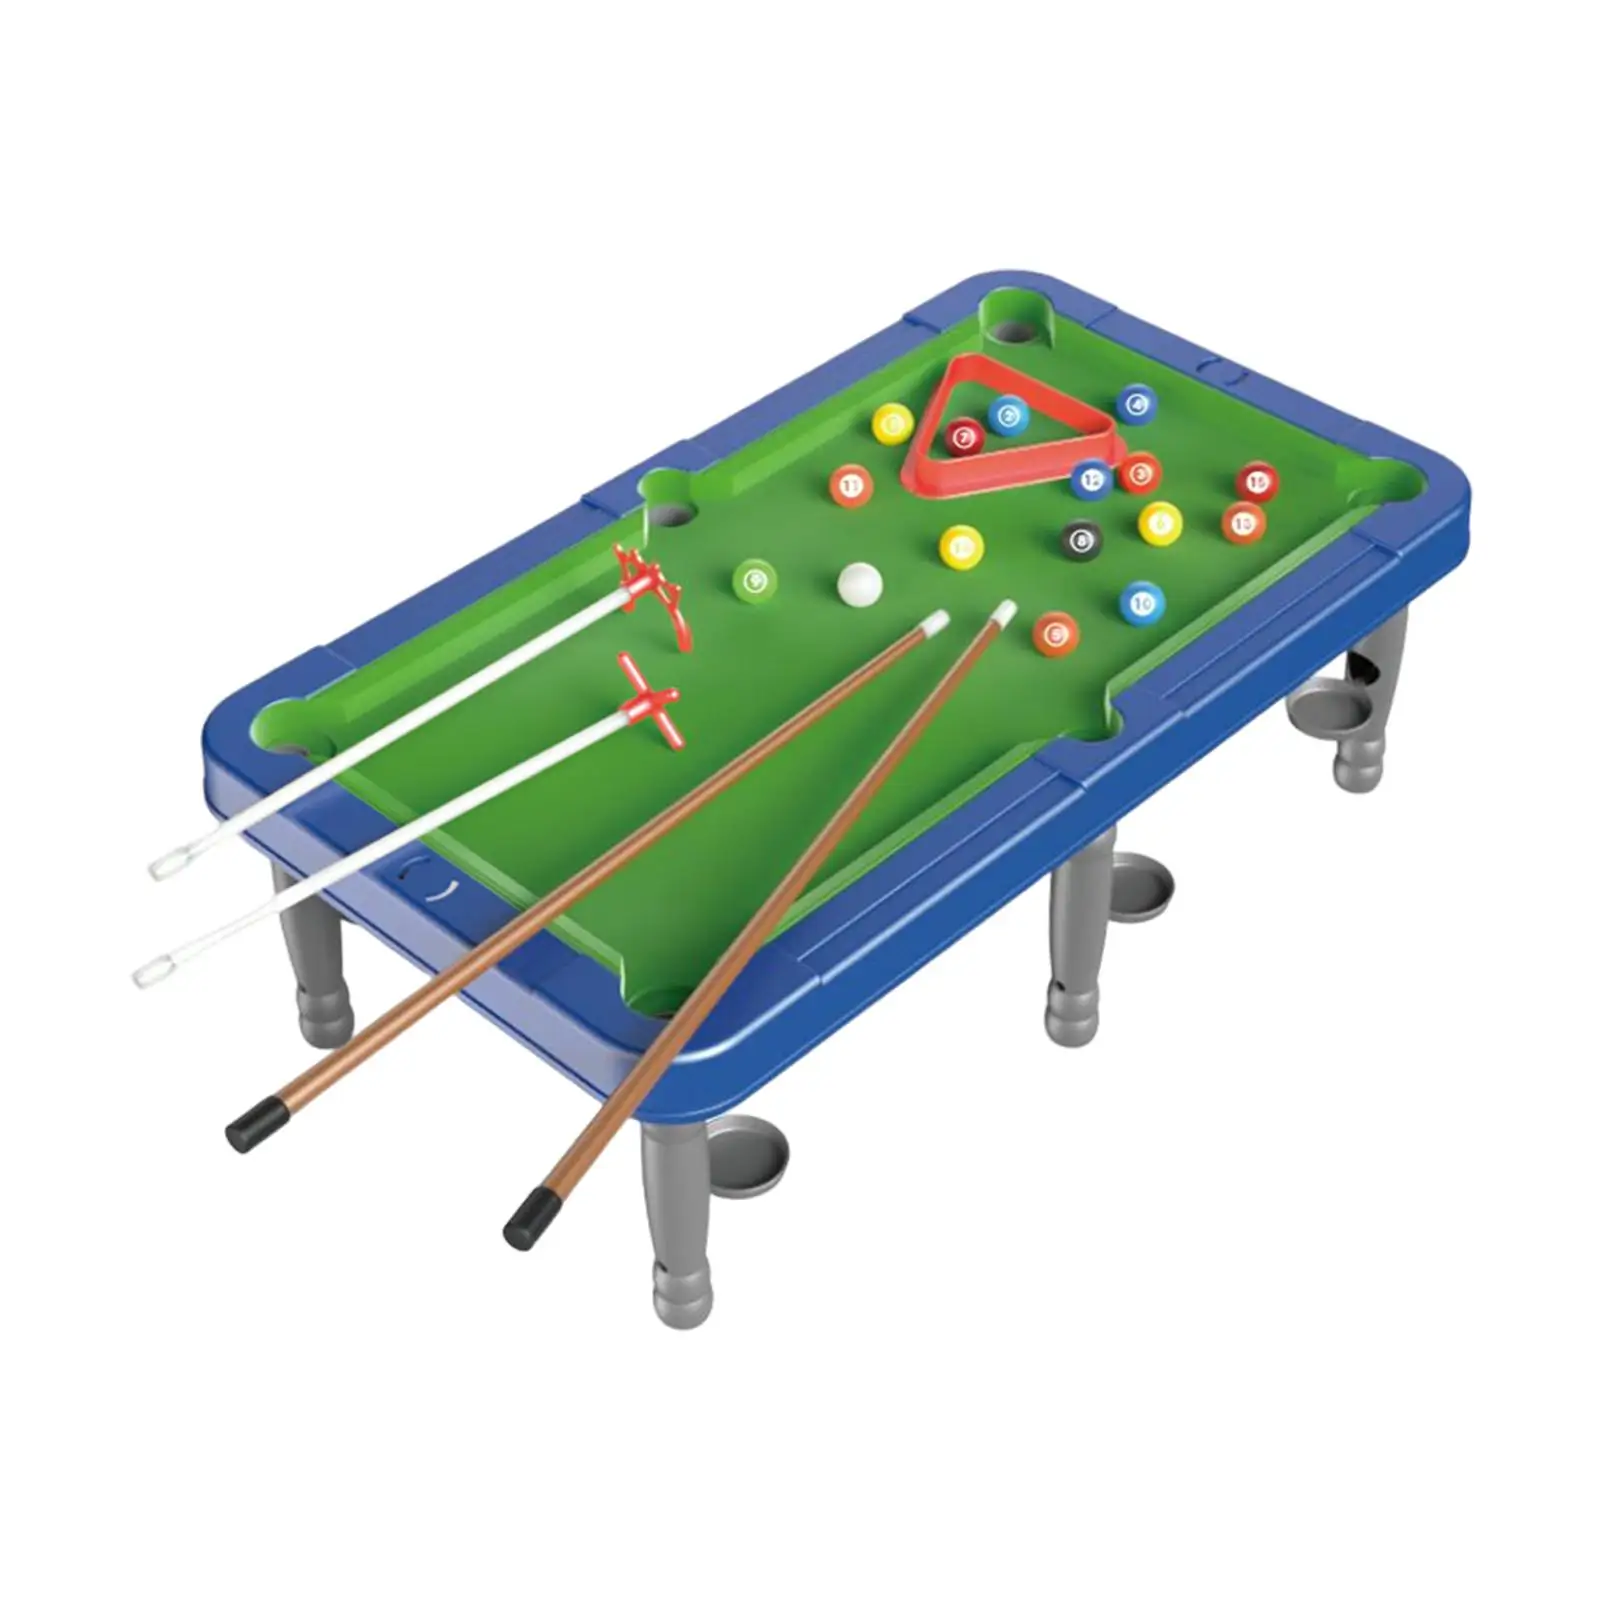 Tabletop Billiards Office Use Chalk, Triangle Rack Interaction Toys Billiard Cues Tabletop Billiards Game for Adults Family Kids